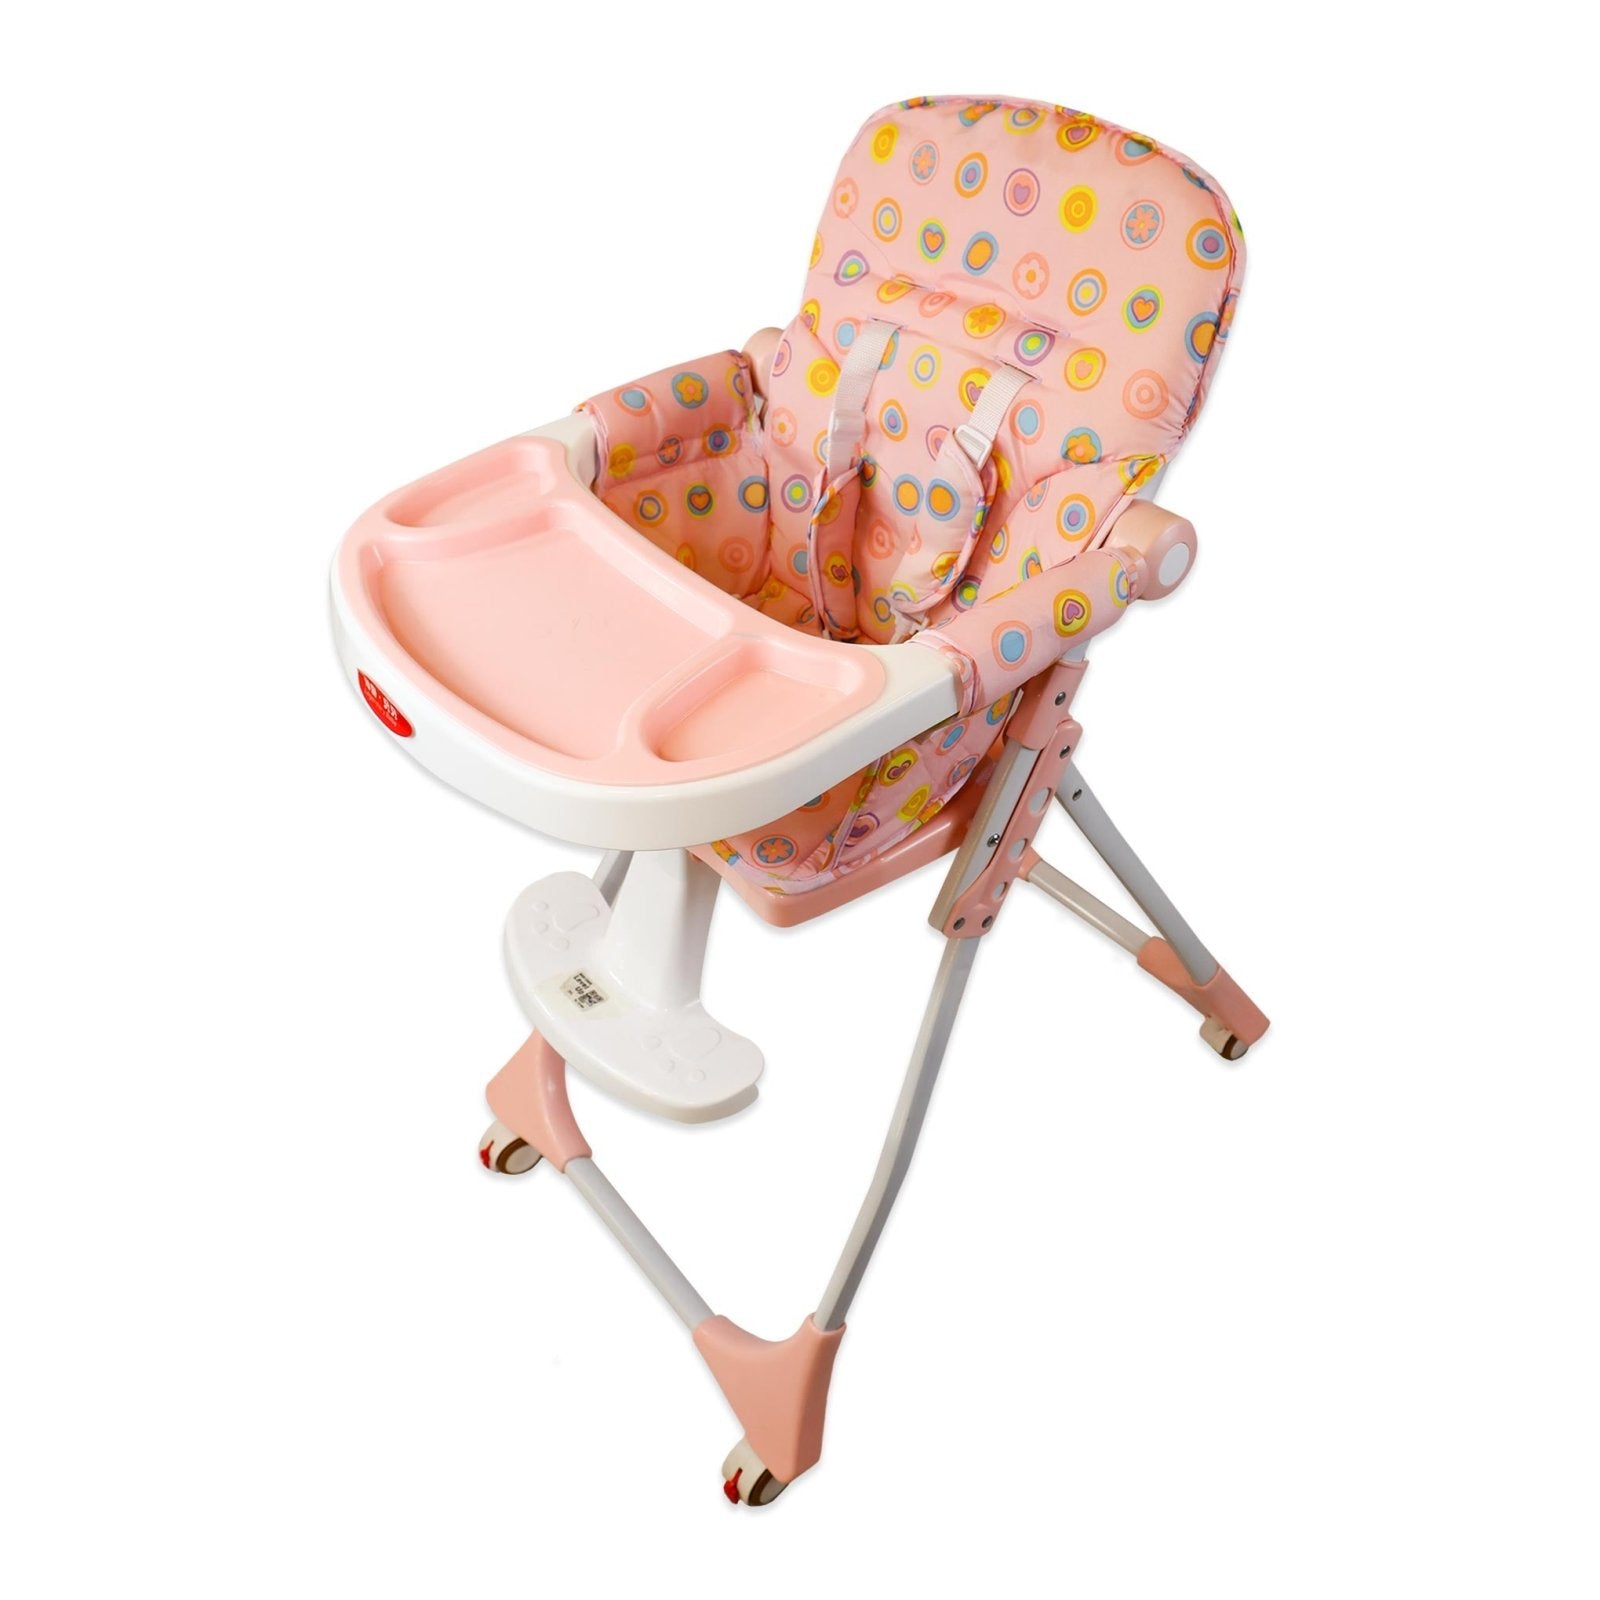 Baby High Chair And Feeding Chair by Legendary Babe